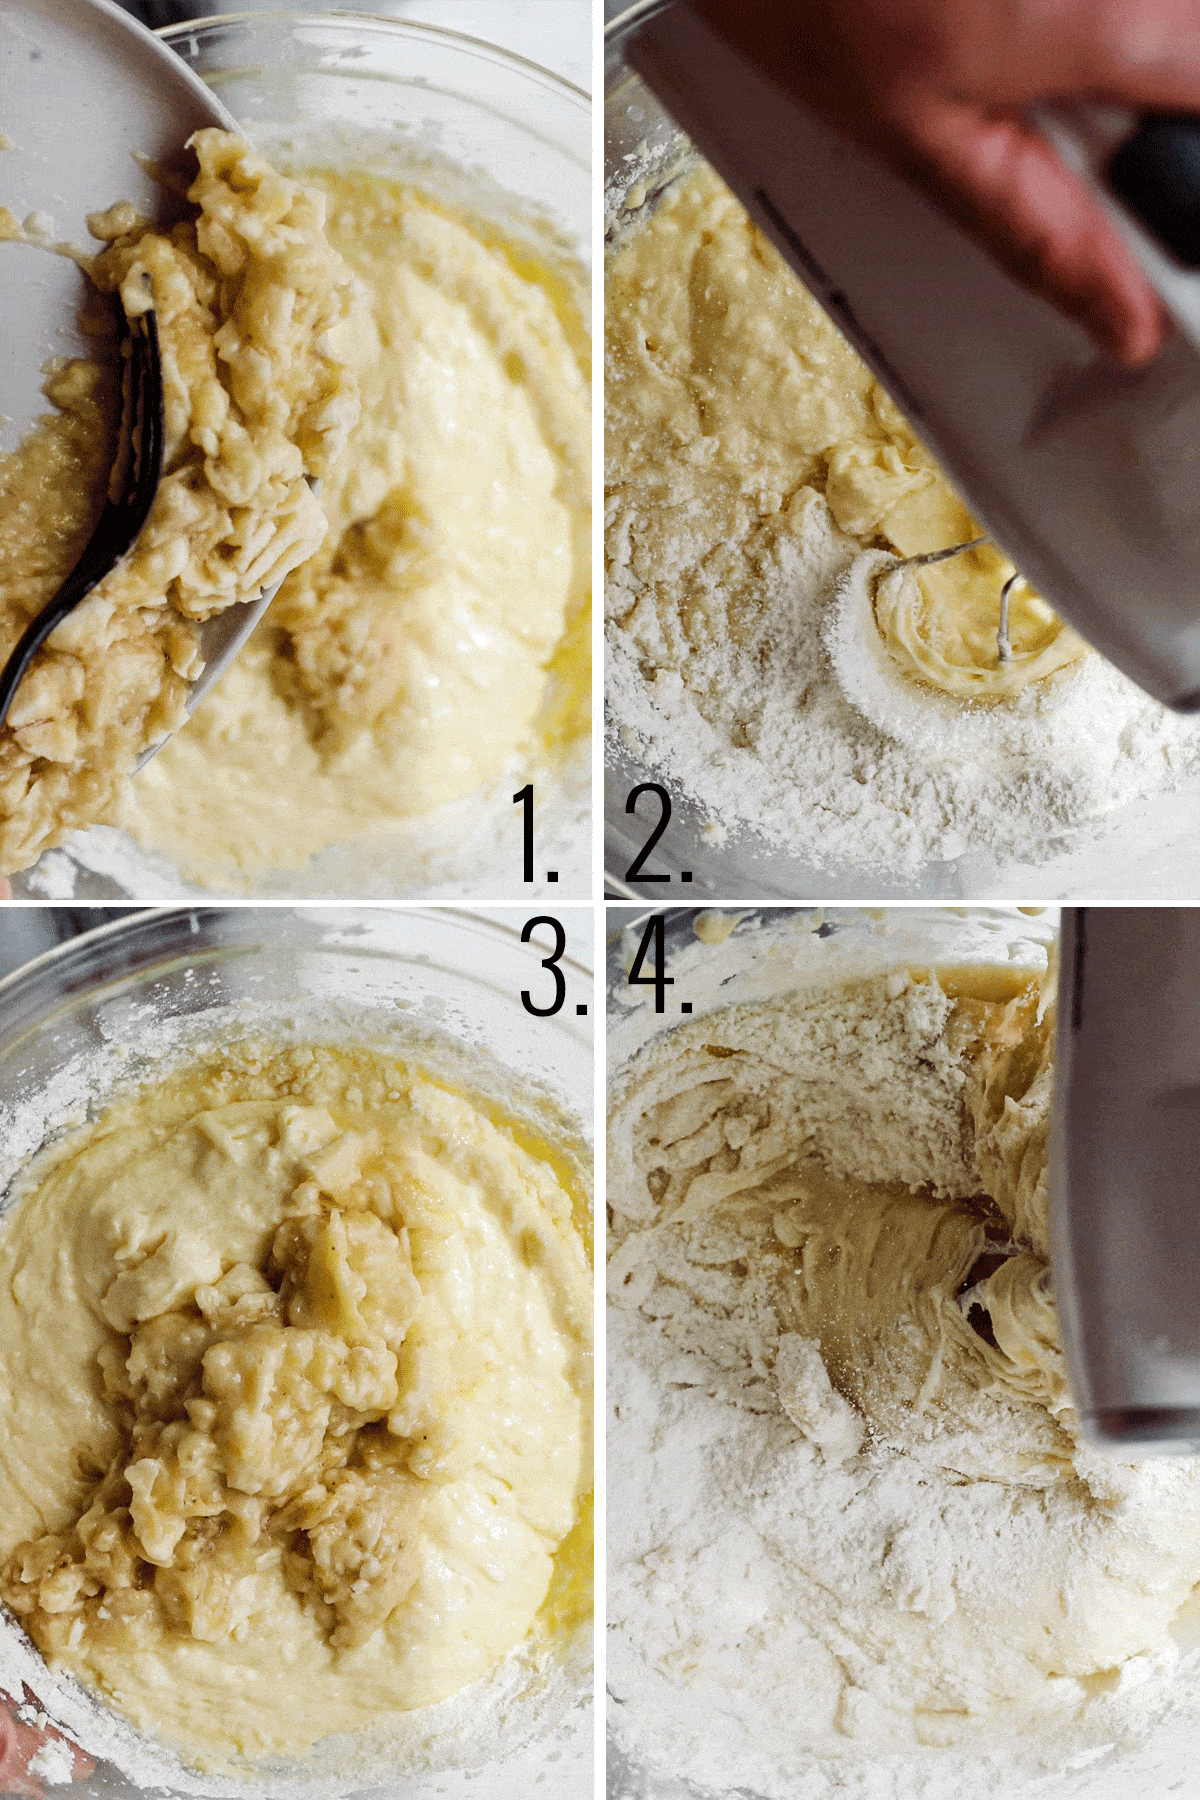 Alternating adding bananas and dry ingredients into a glass bowl. 